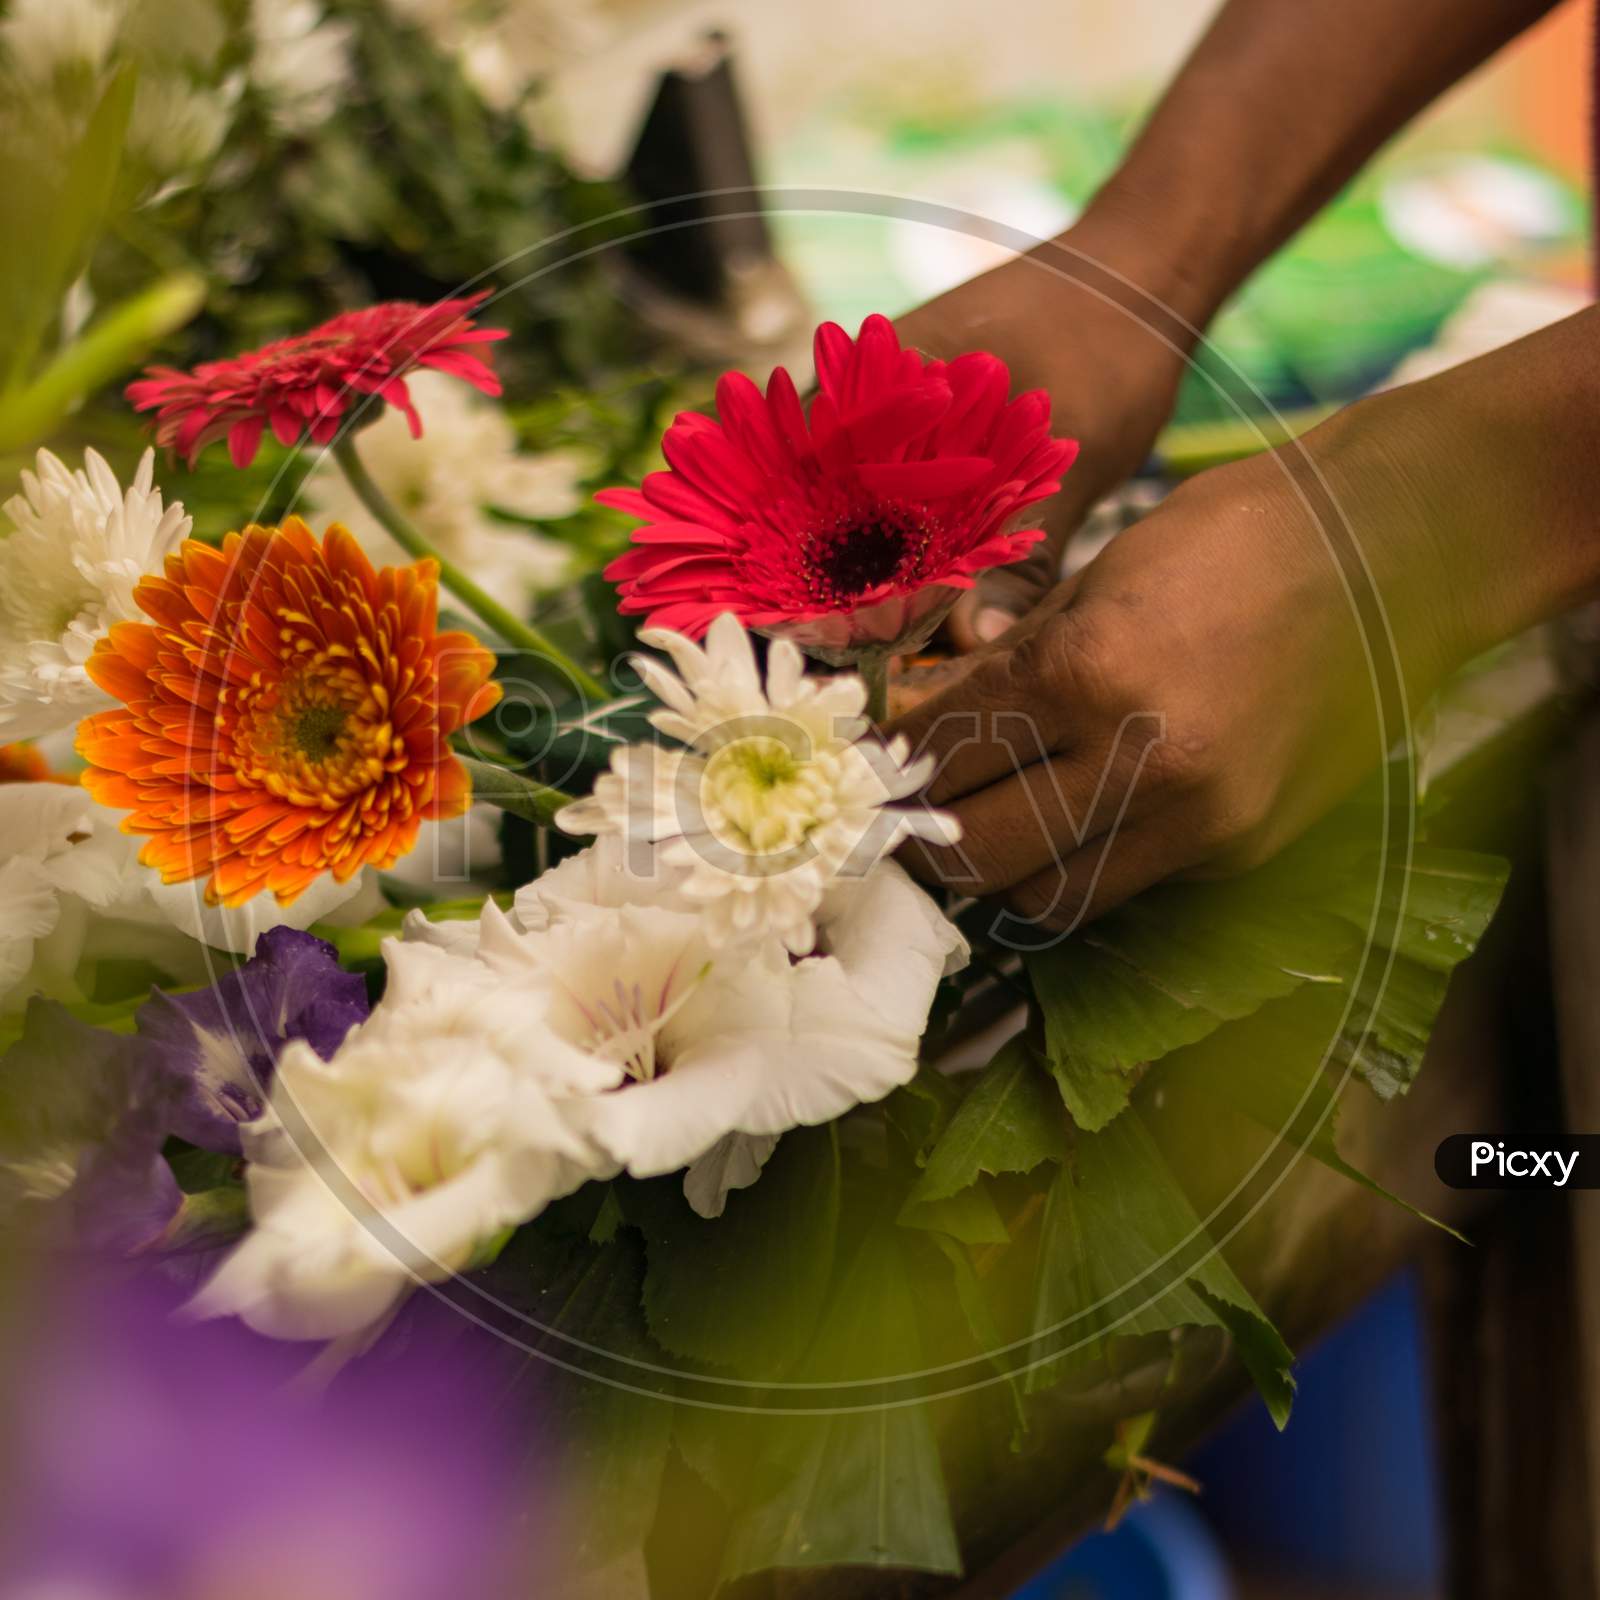 Flower Seller Is Making Flower A Bouquet With Red And Orange Color Gerbera And White Dahlia Flower